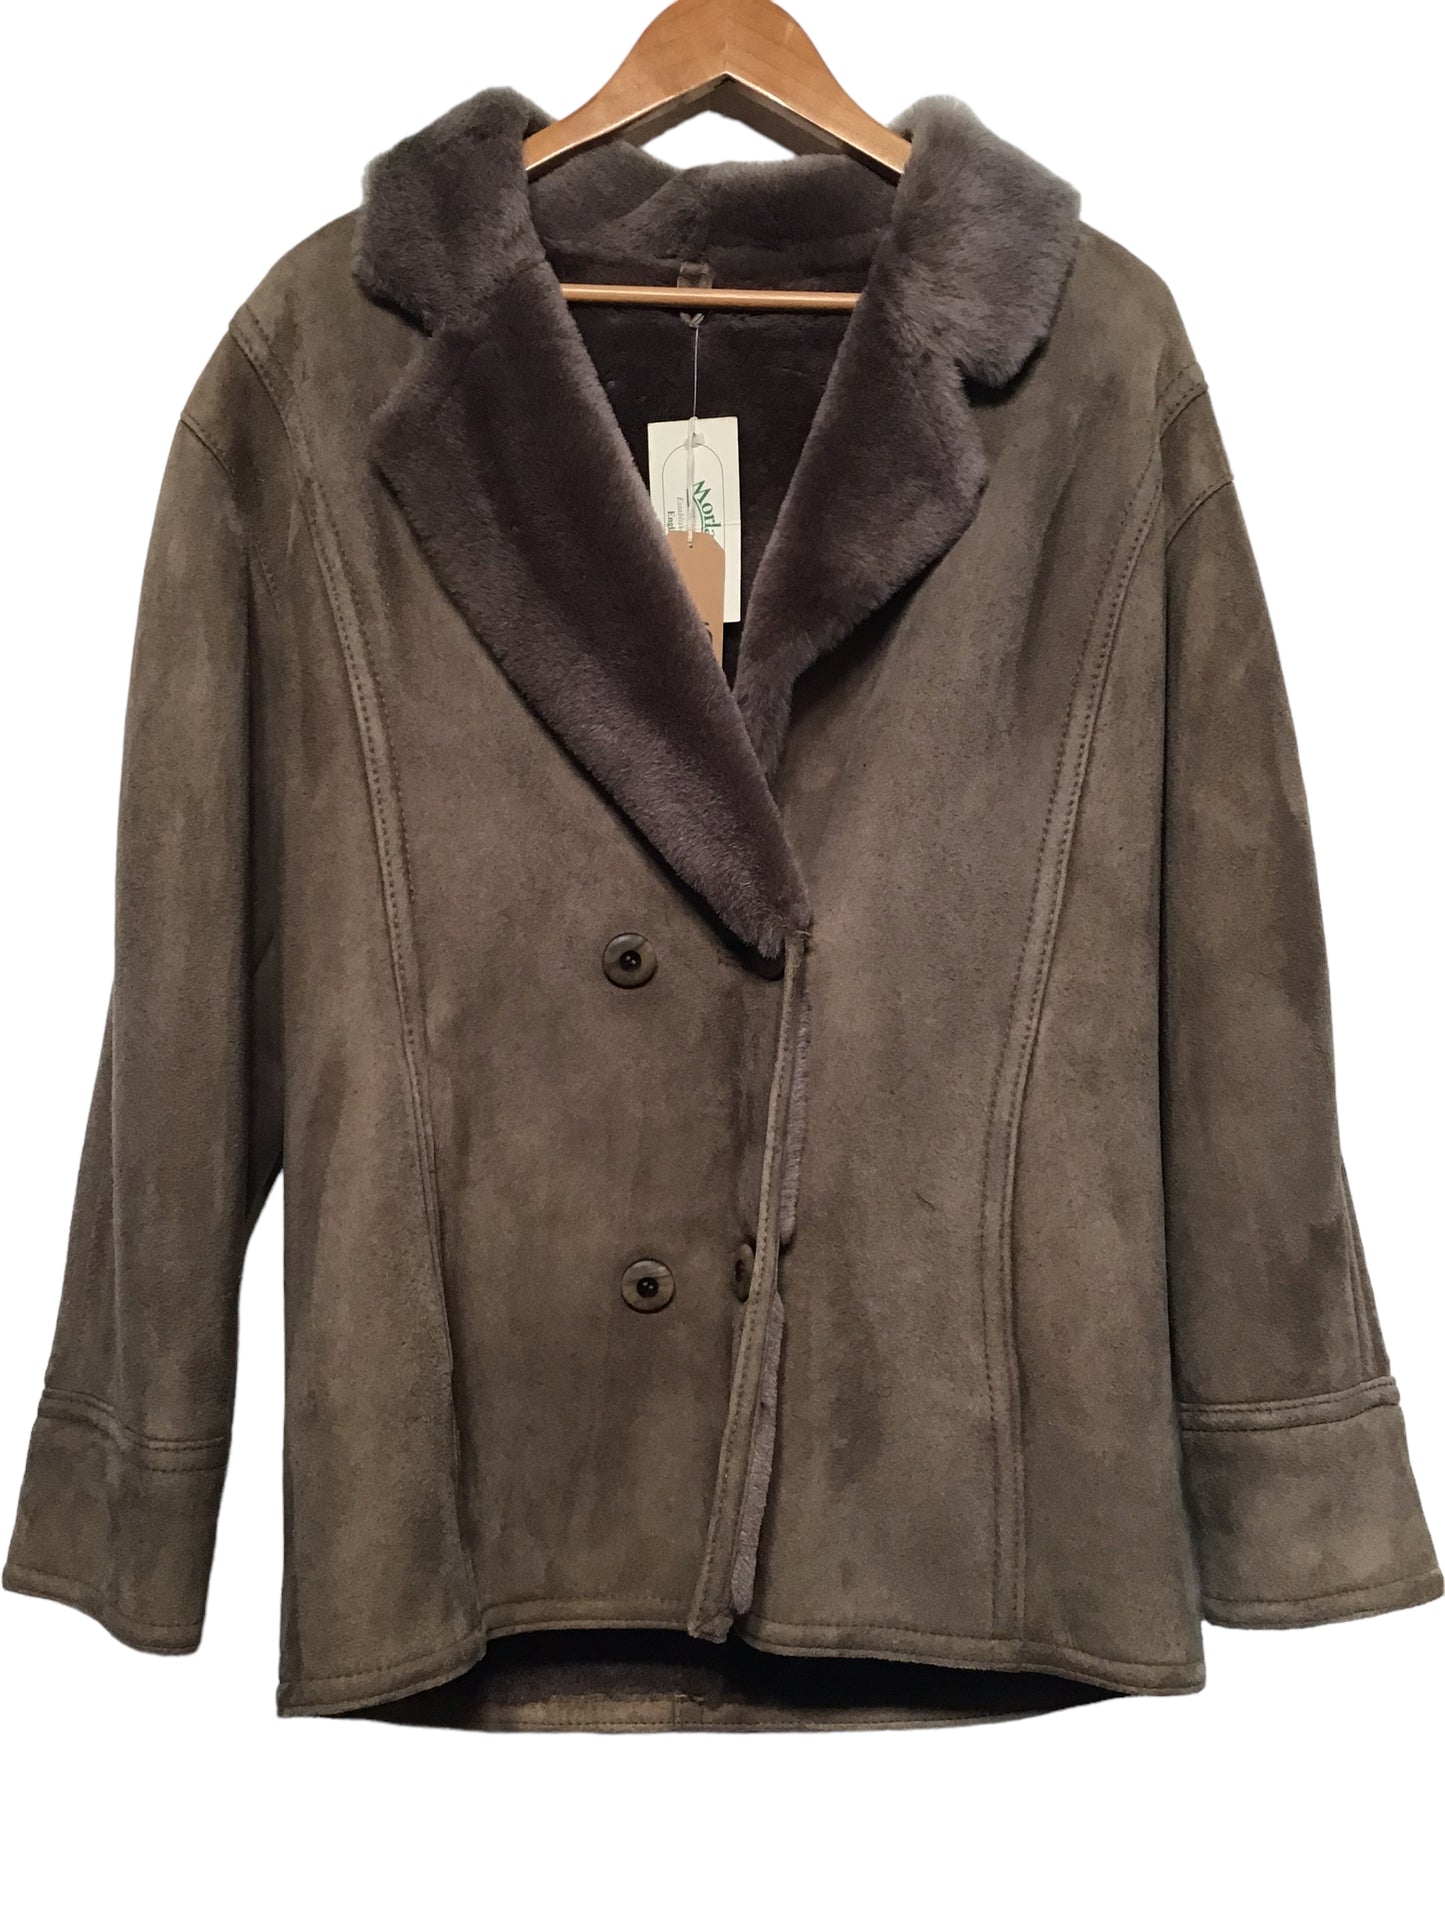 Suede and Shearling Jacket (Size M)